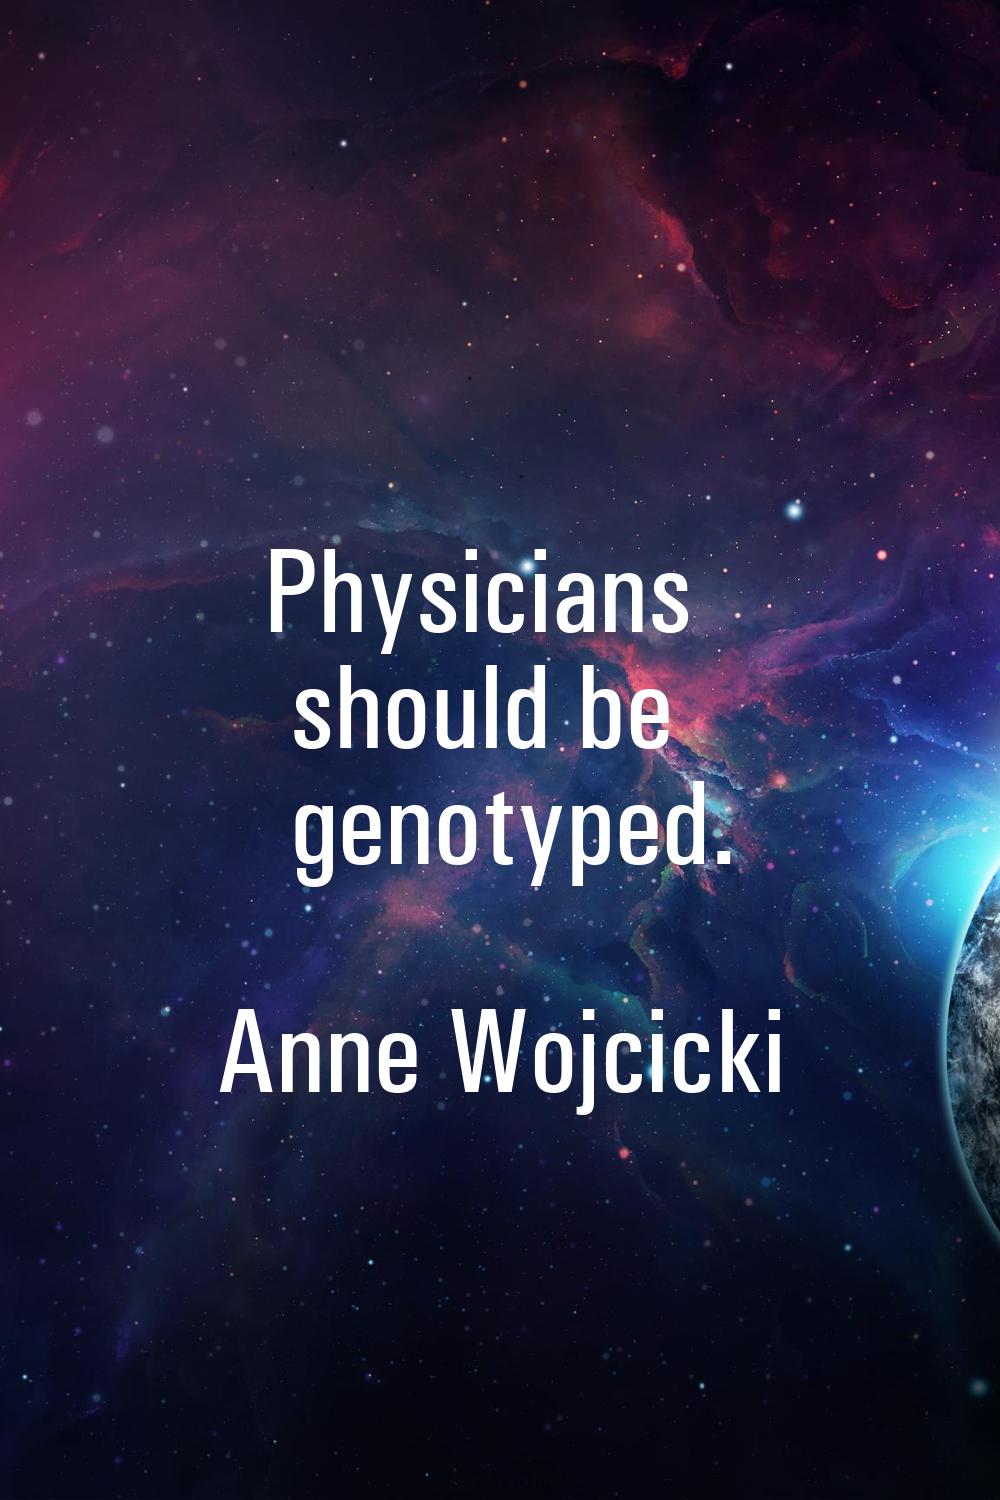 Physicians should be genotyped.